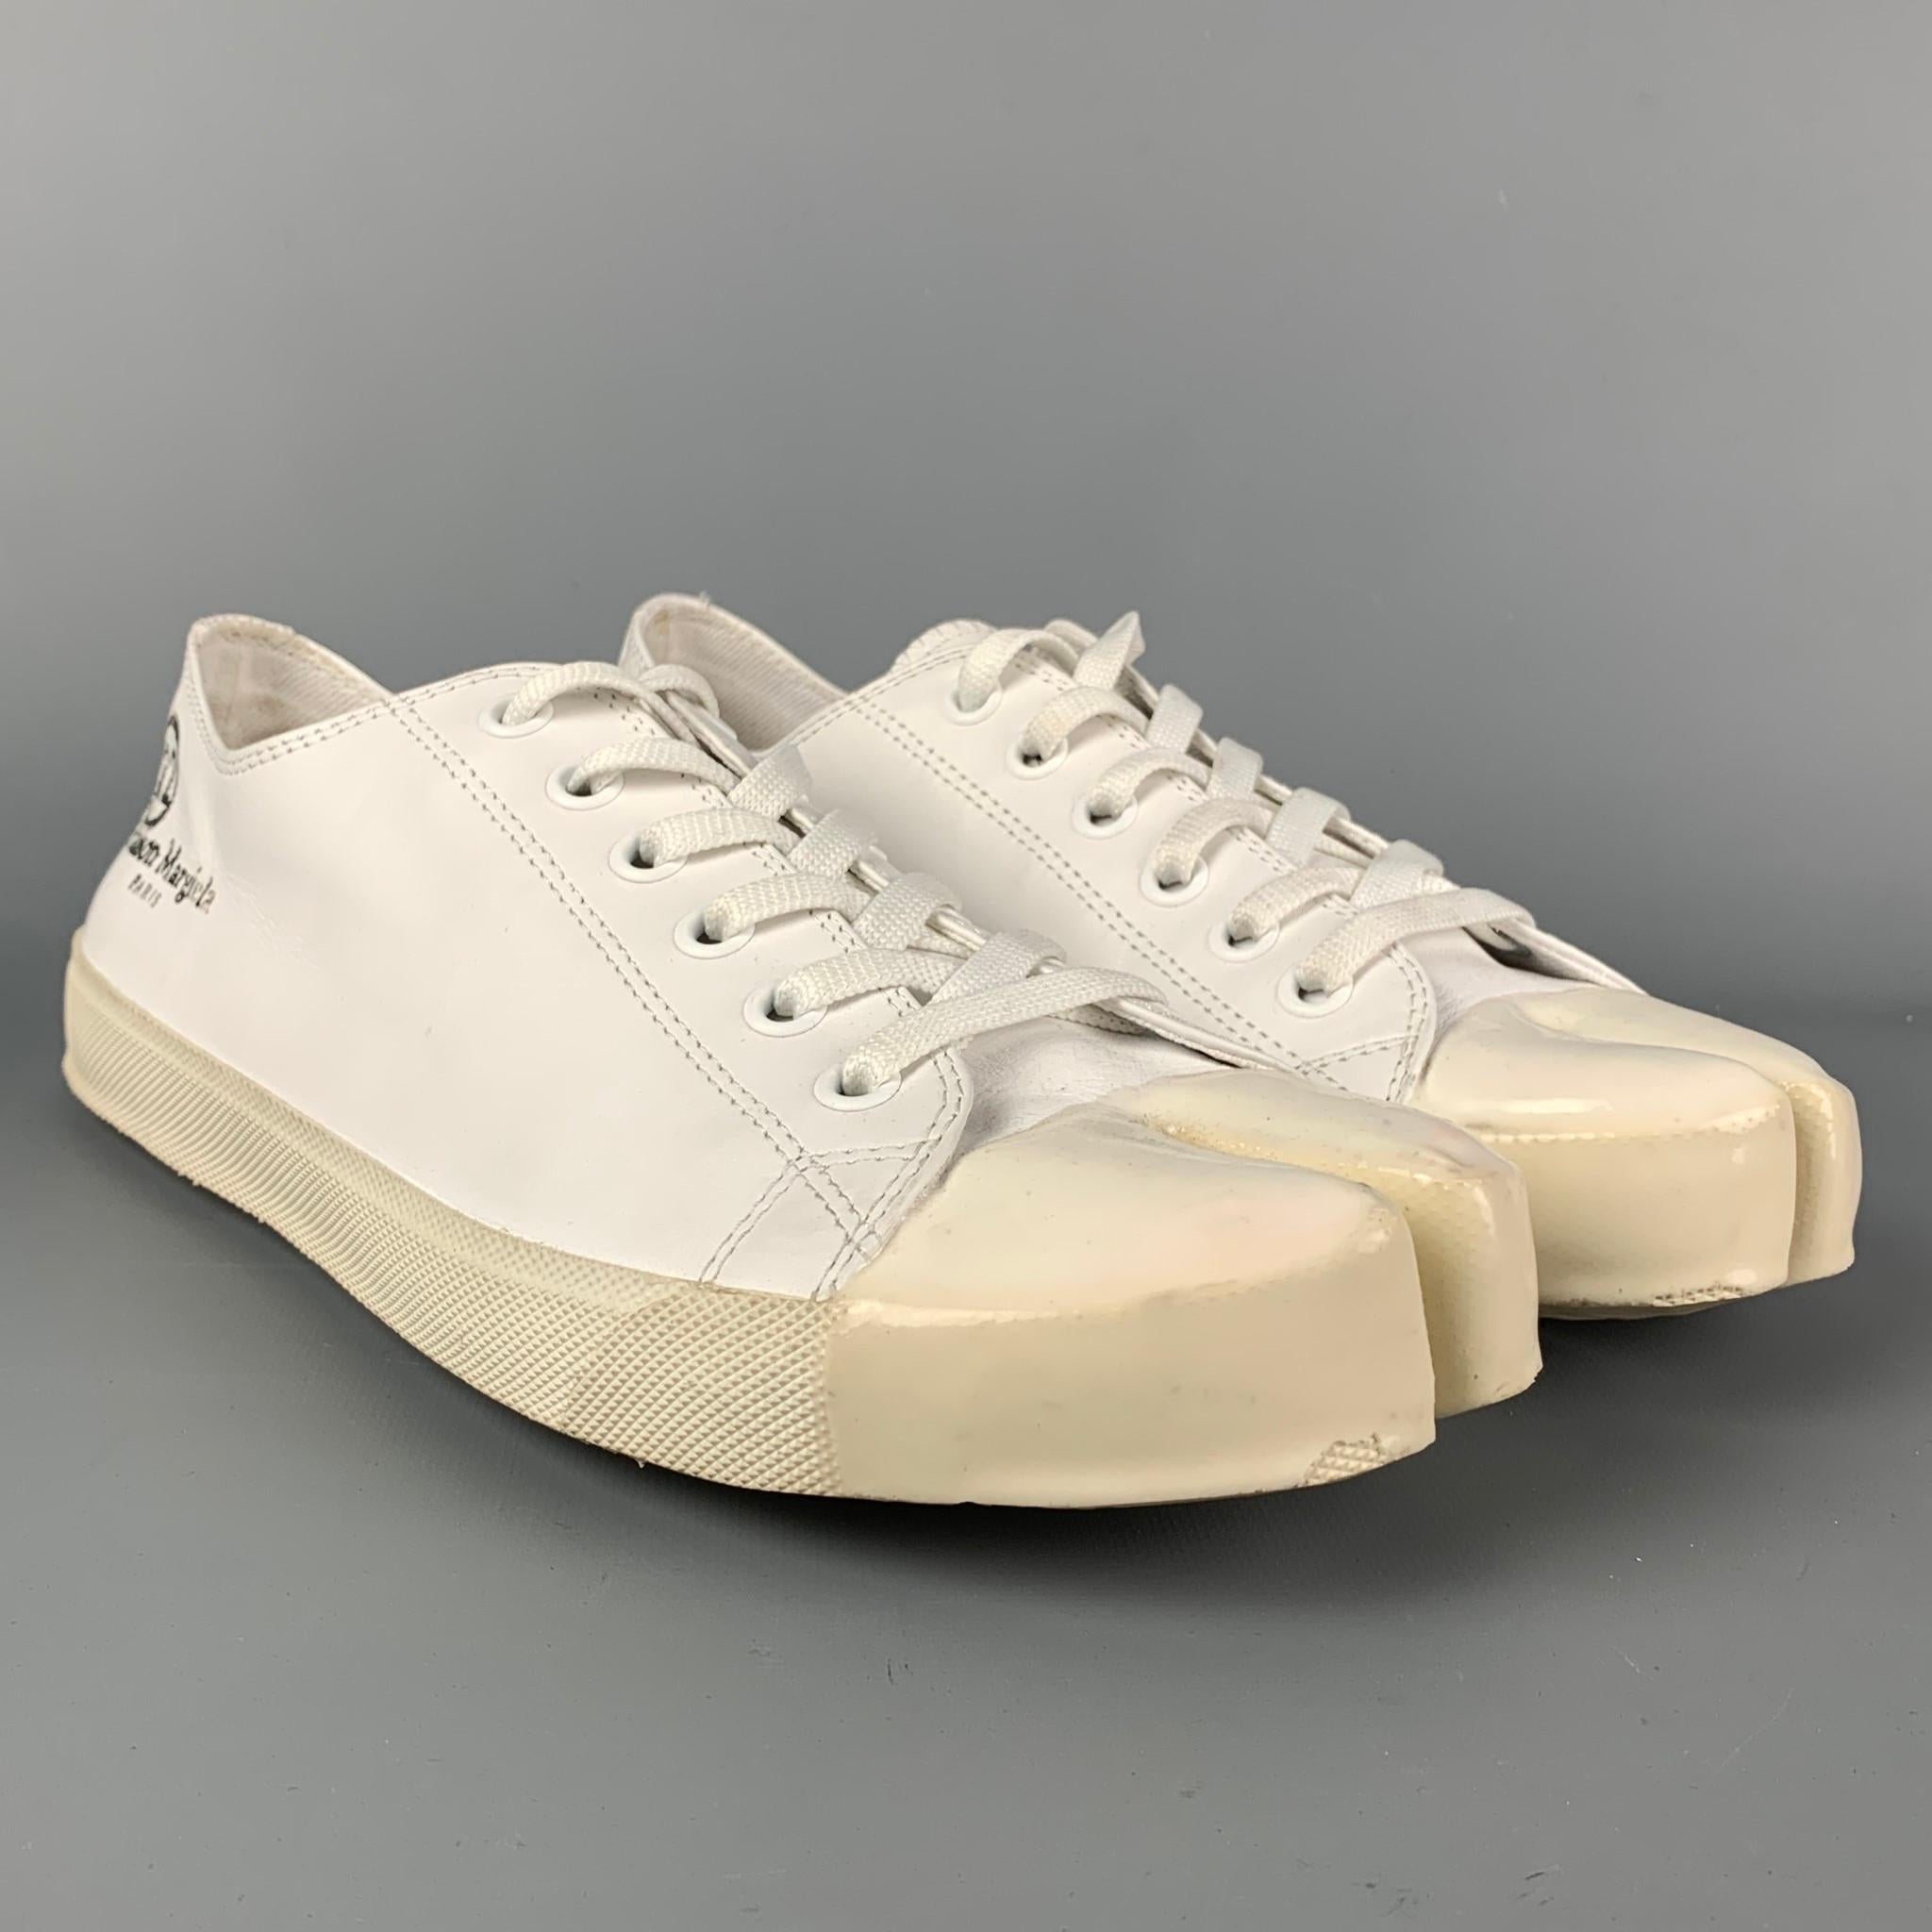 MAISON MARGIELA 'Tabi' sneakers comes in a white canvas with a patent leather trim featuring signature split toe design, rubber sole, and a lace up closure. Made in Italy. 

Very Good Pre-Owned Condition.
Marked: 44

Outsole: 12 in. x 4.25 in. 